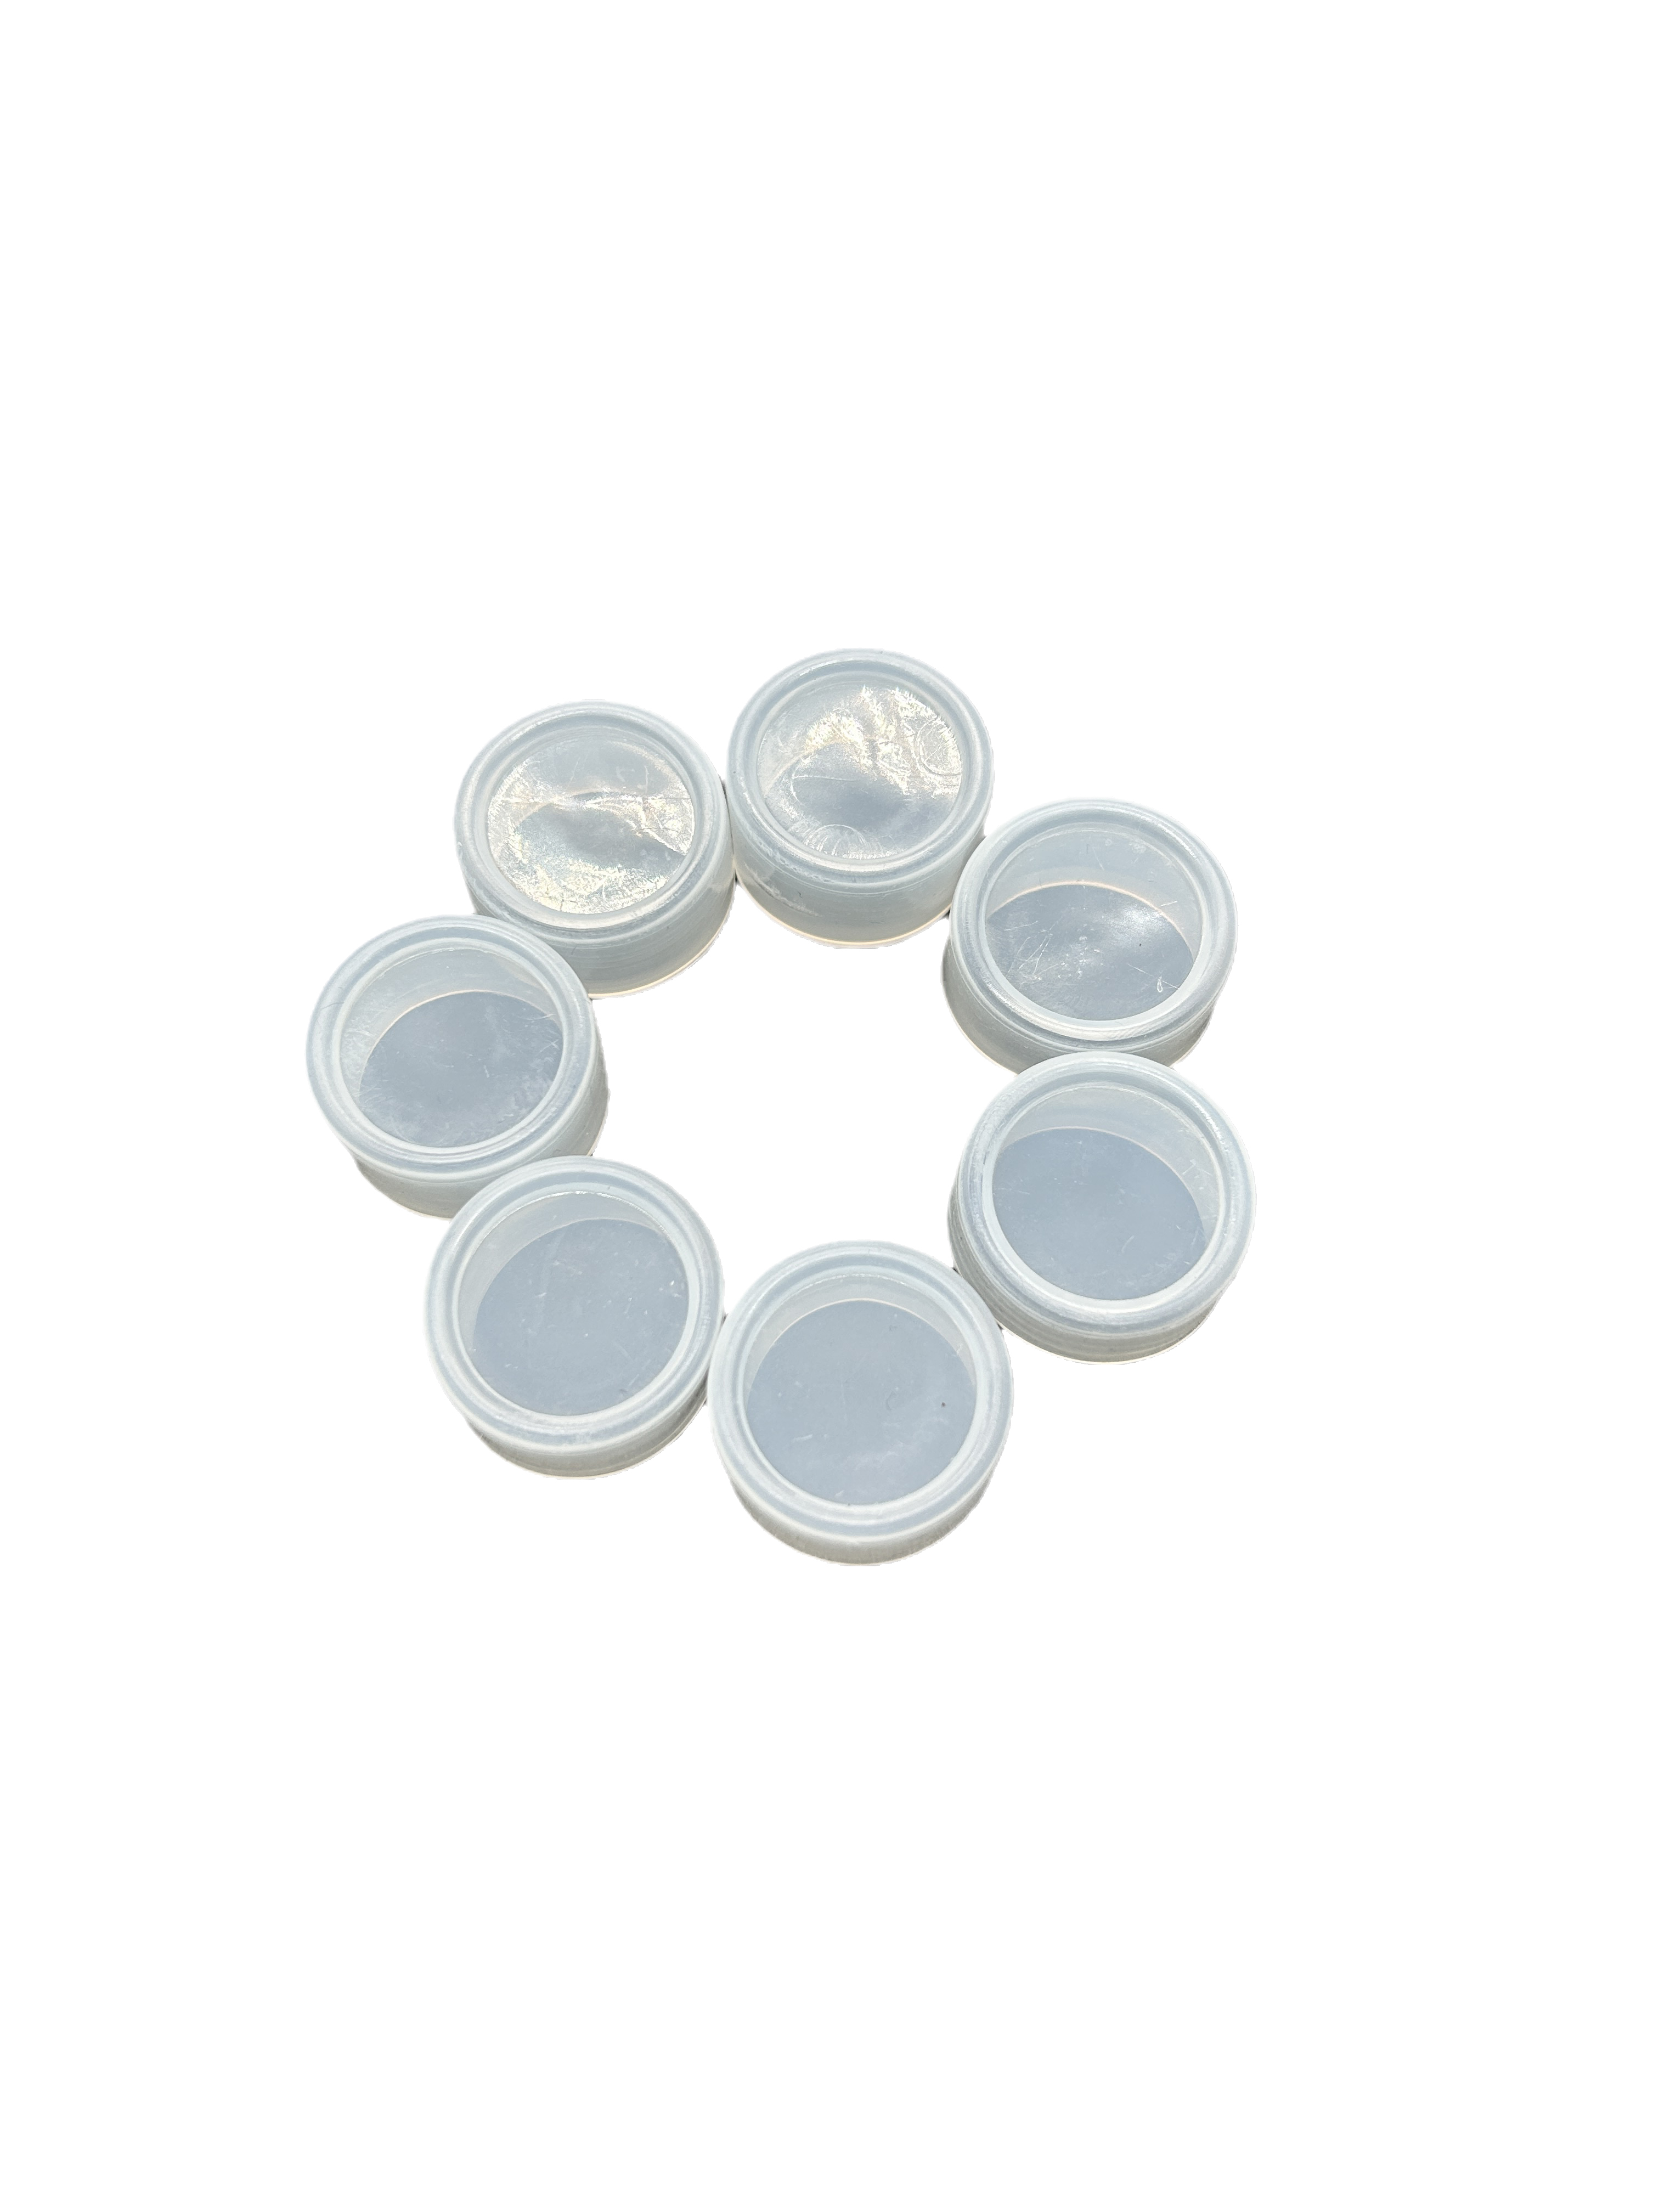 Circular silicone sleeve 22mm button waterproof cap, dustproof switch protective cover, transparent white sealing leather ring